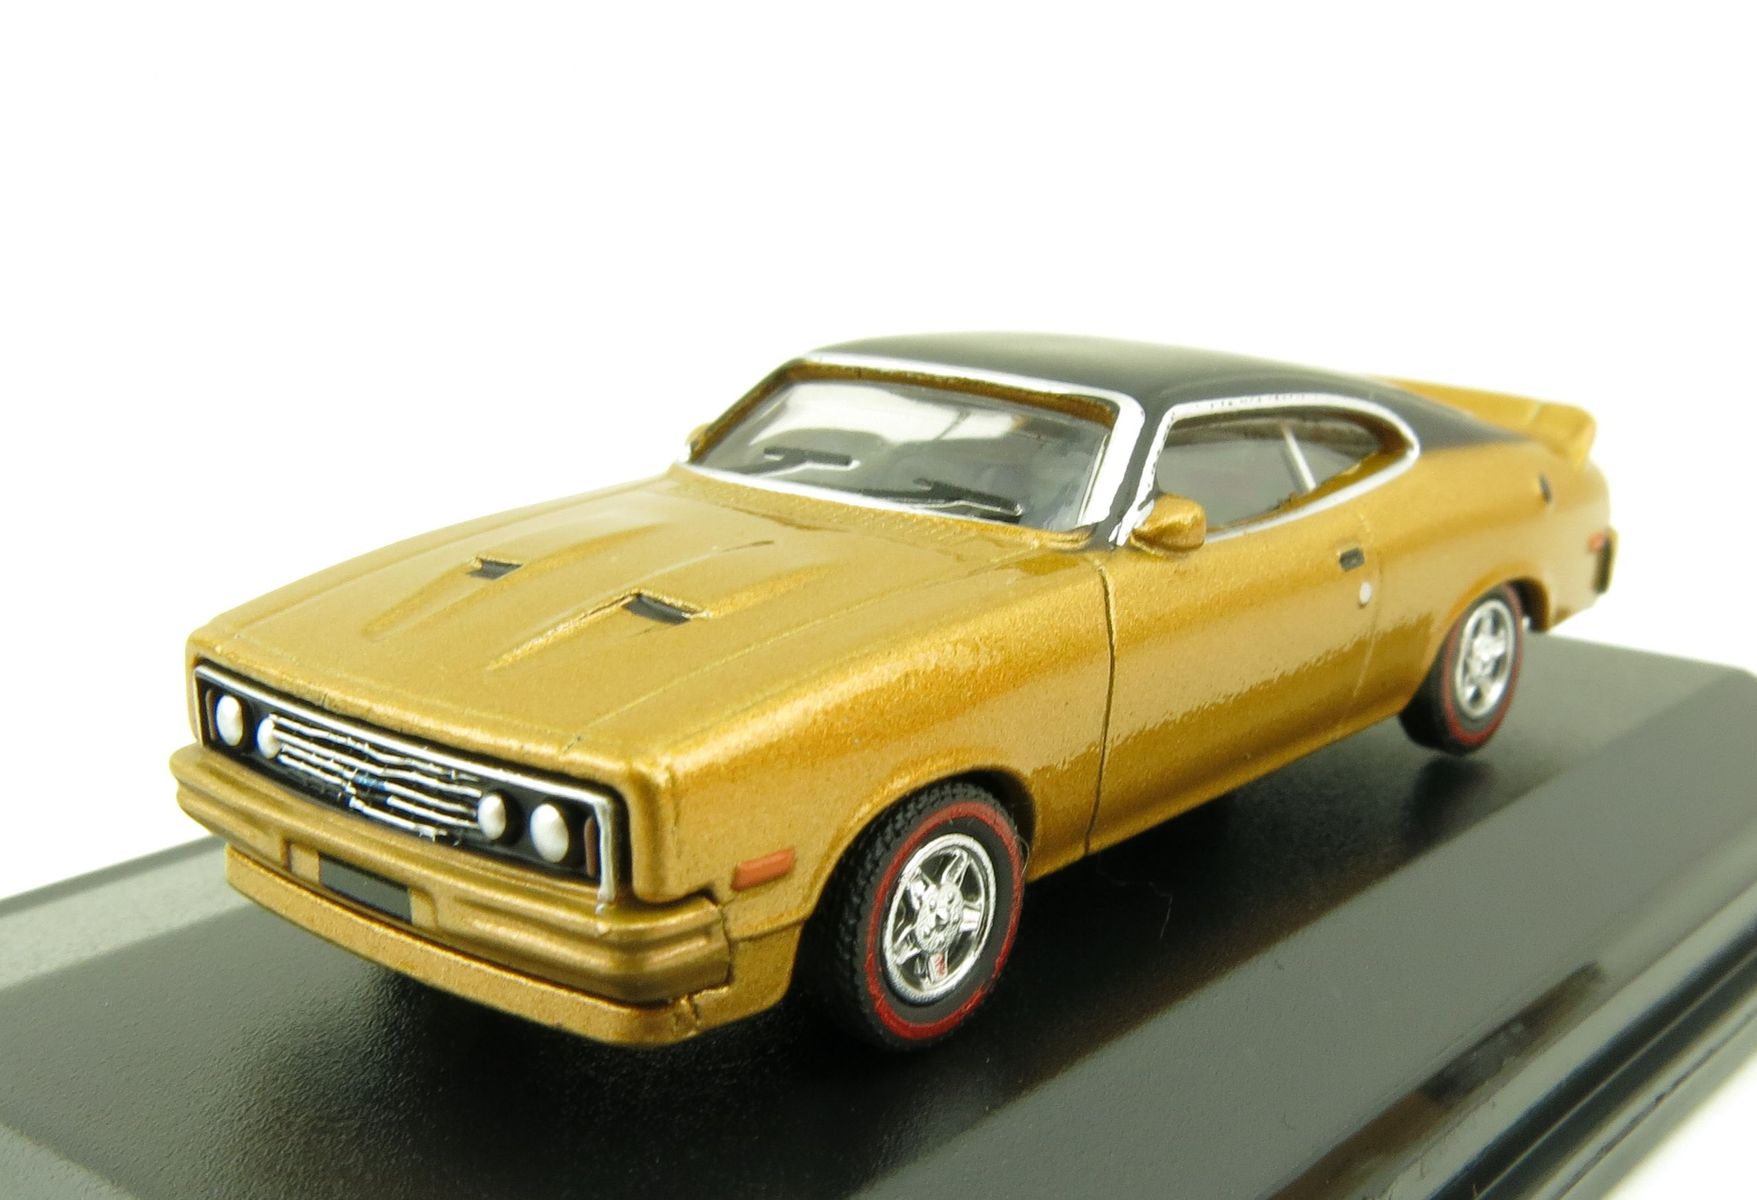 Product Image - Road Ragers - Australian 1979 Ford XC GS Falcon Coupe Muscle Car - Gold Dust - H0 Scale 1:87